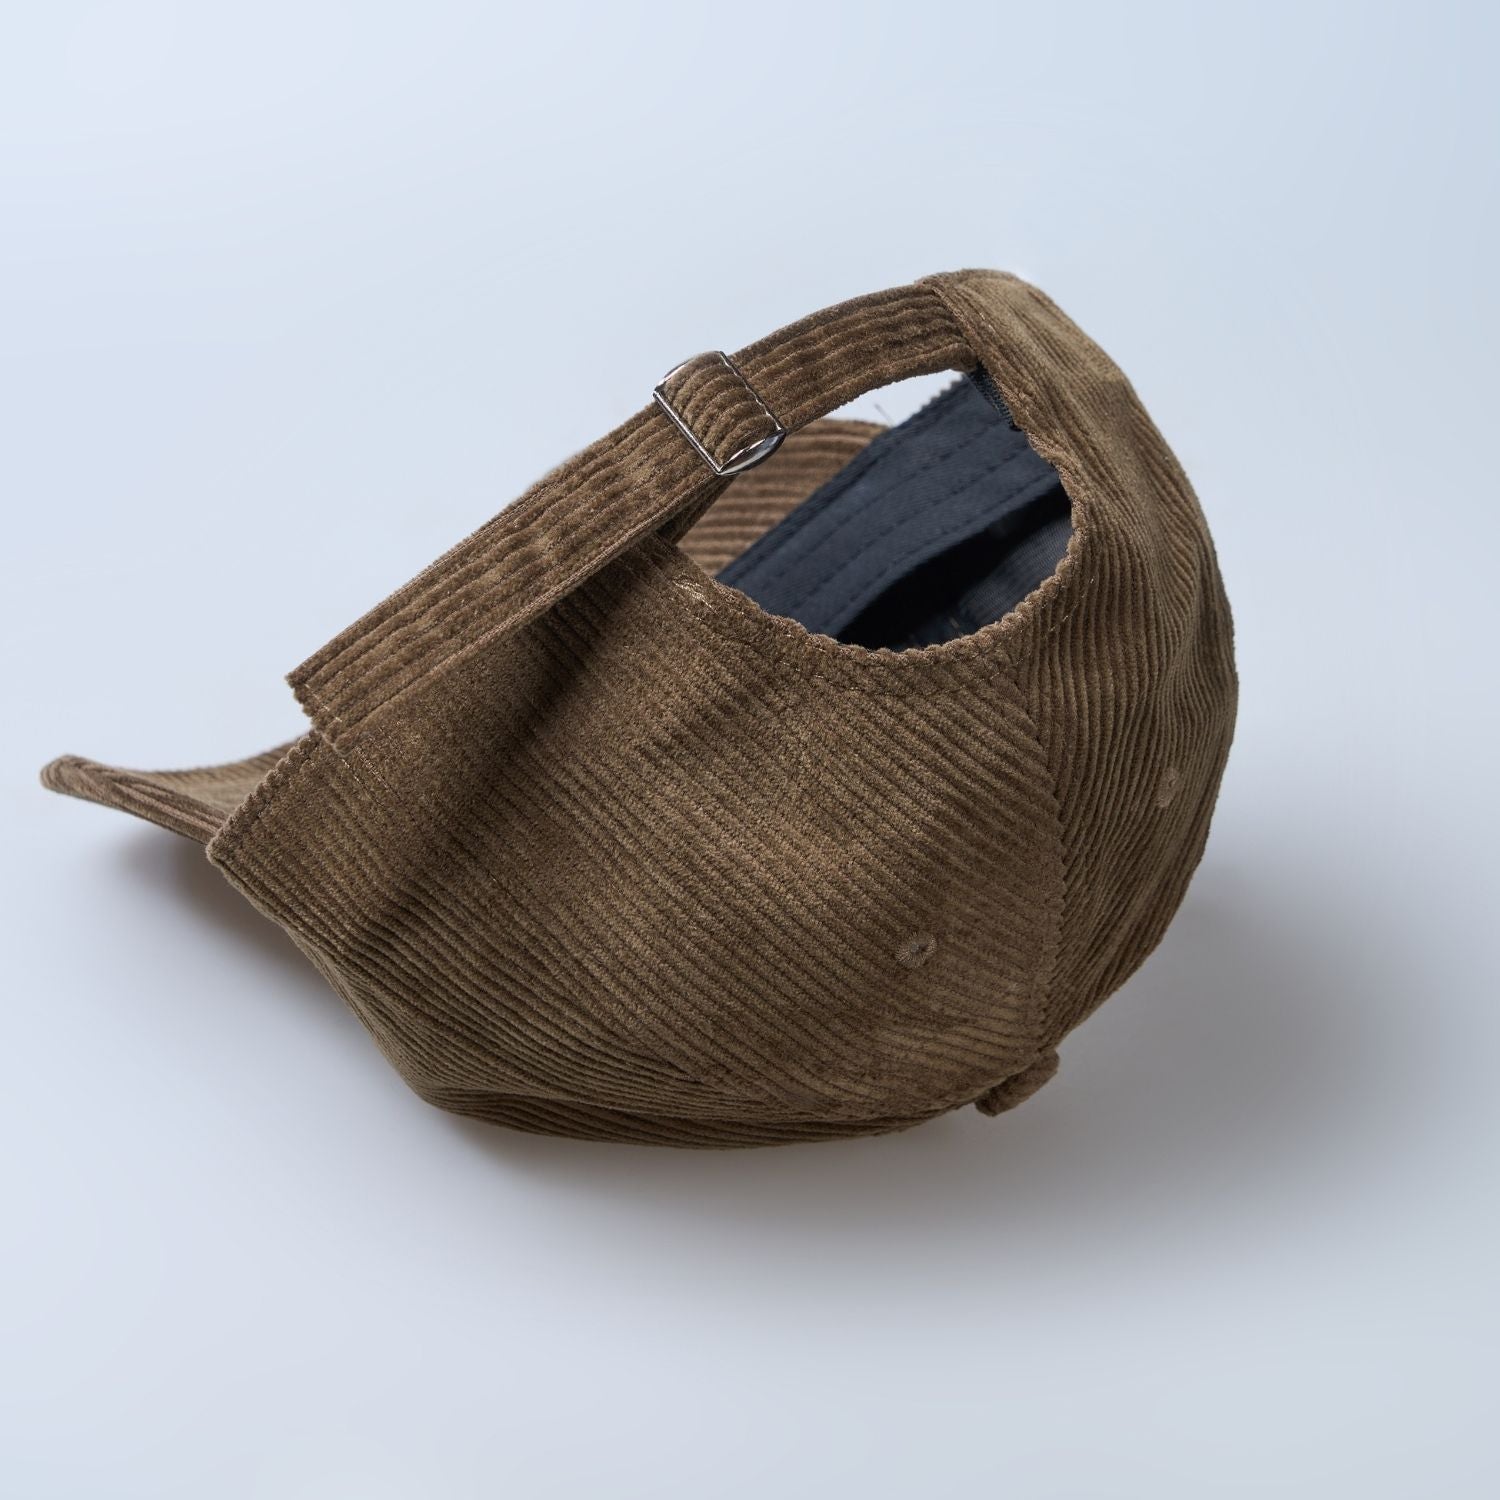 Brown colored cap for men with 'what' text written on it, adjustable strap closeup.